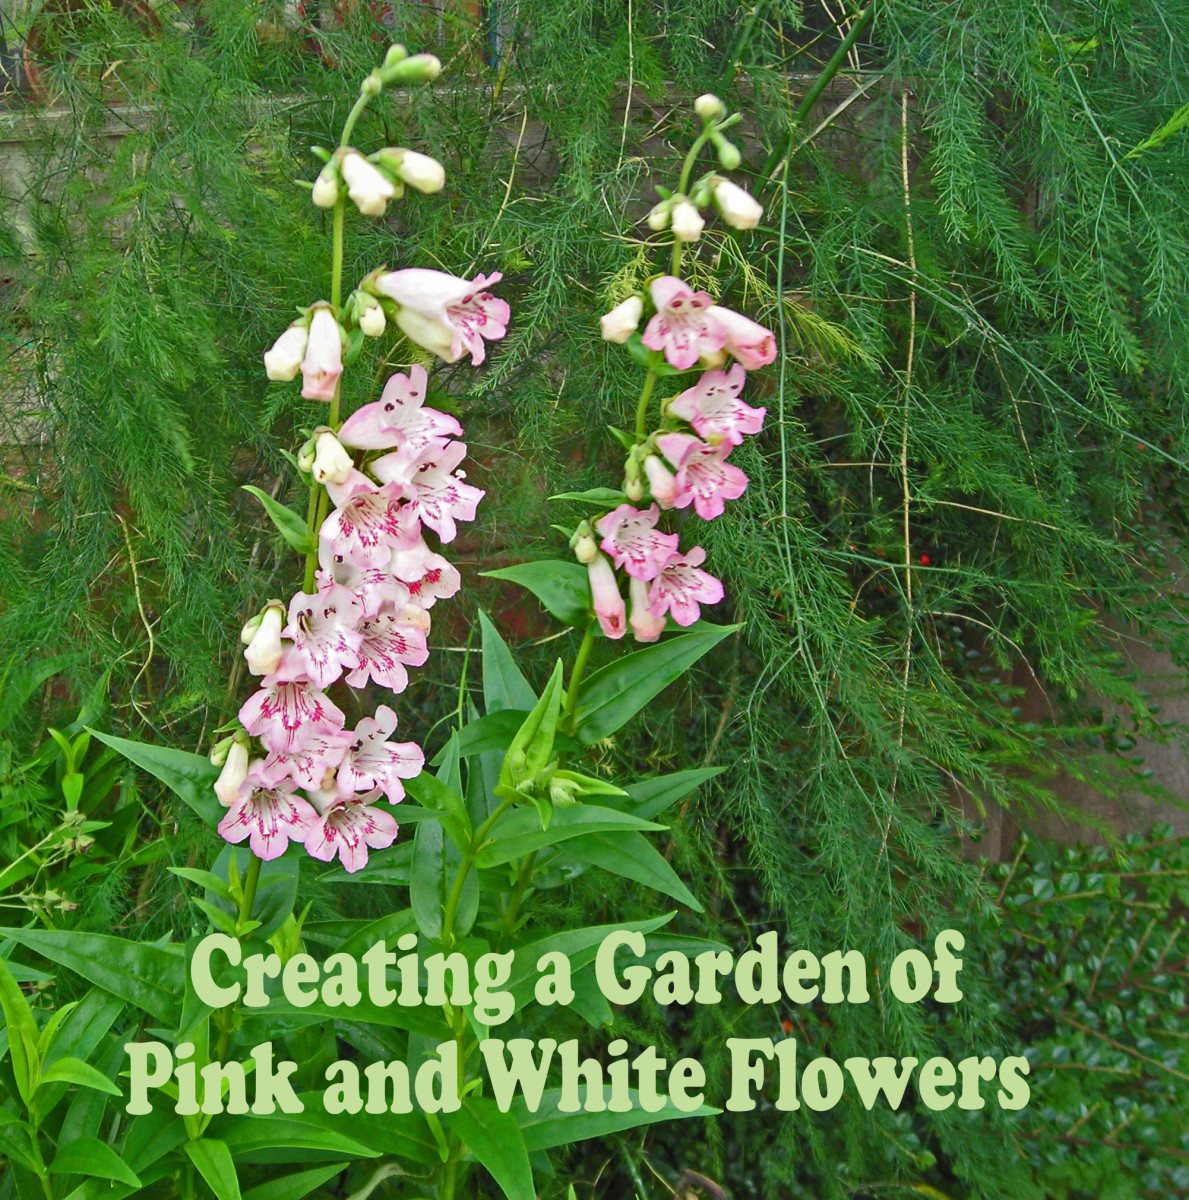 Creating a Garden of Pink and White Flowers